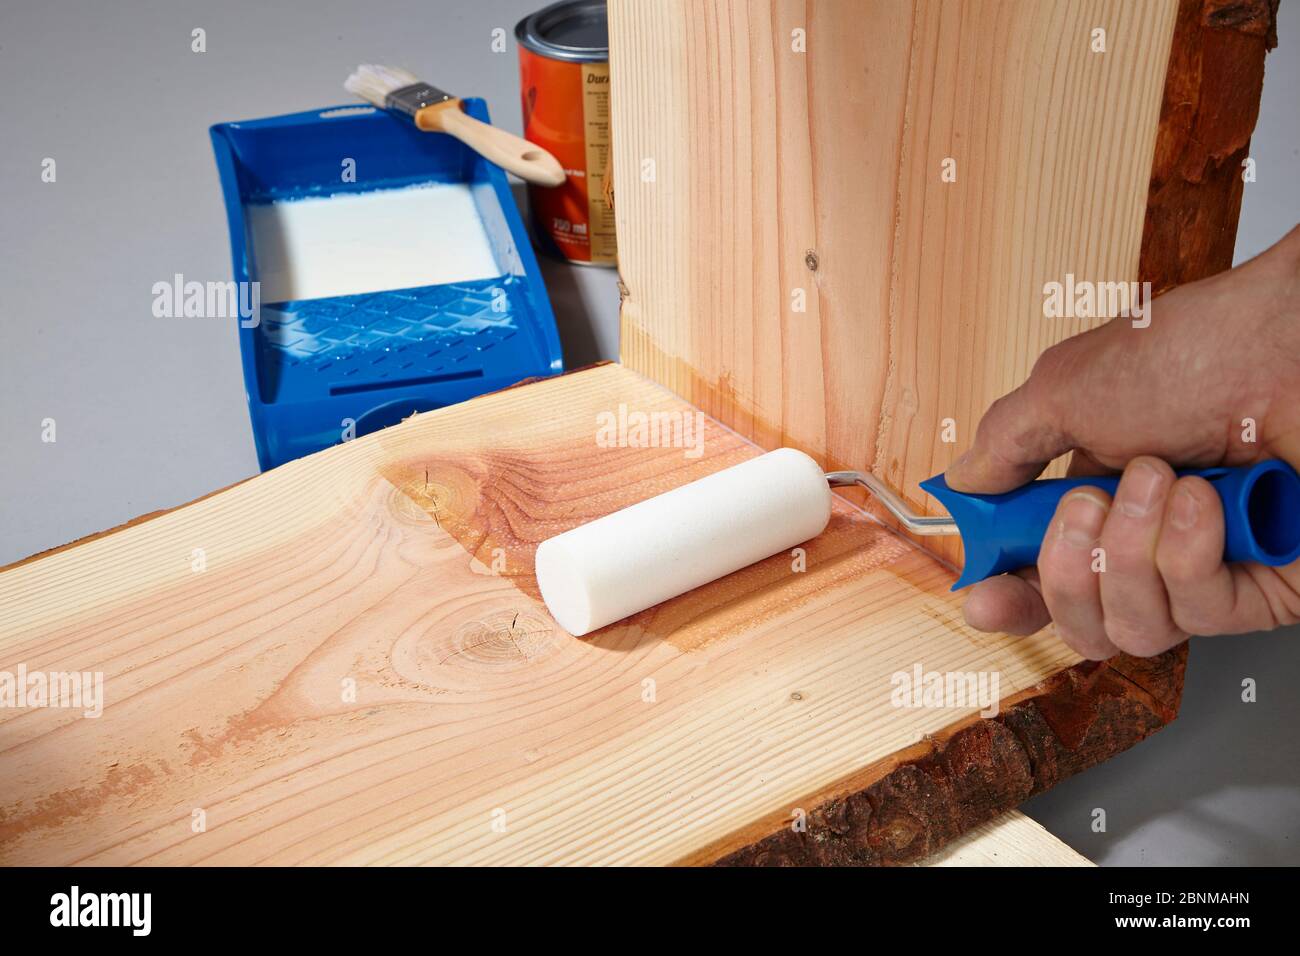 Building a wooden shelf, do-it-yourself production, step-by-step, step 17b painting the finished glued furniture with water-soluble acrylic paint, first painting the corners with a brush, then painting the surfaces with a foam roller Stock Photo